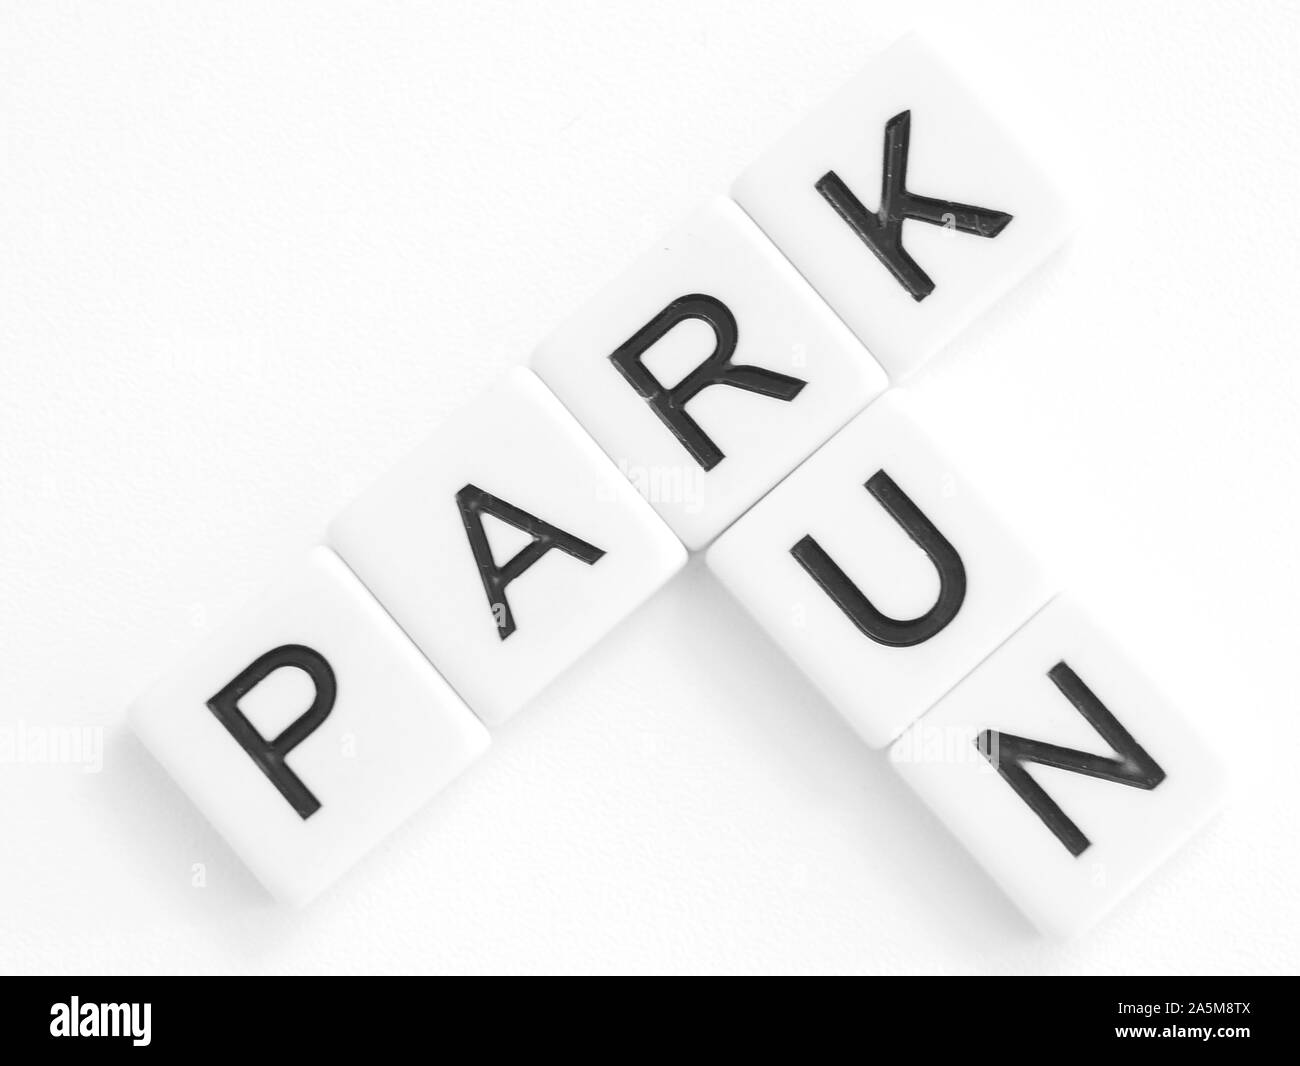 Words park and run in crossword style in black lettering on white tiles Stock Photo